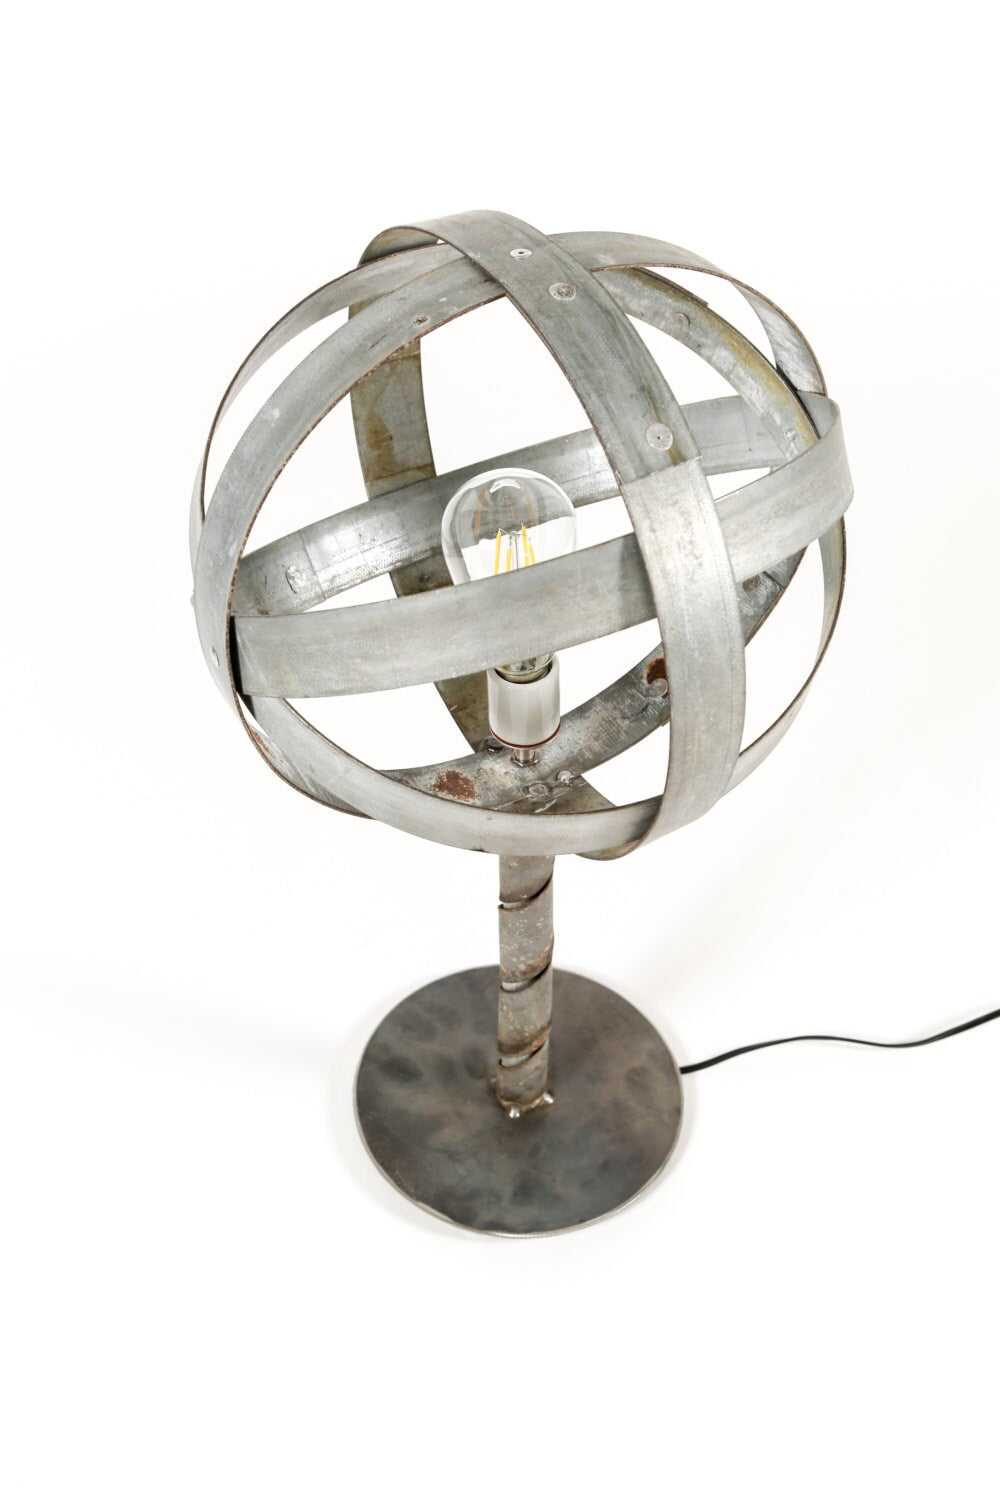 Wine Barrel Desk Lamp - Tavoci - Made from retired California wine barrel rings. 100% Recycled!